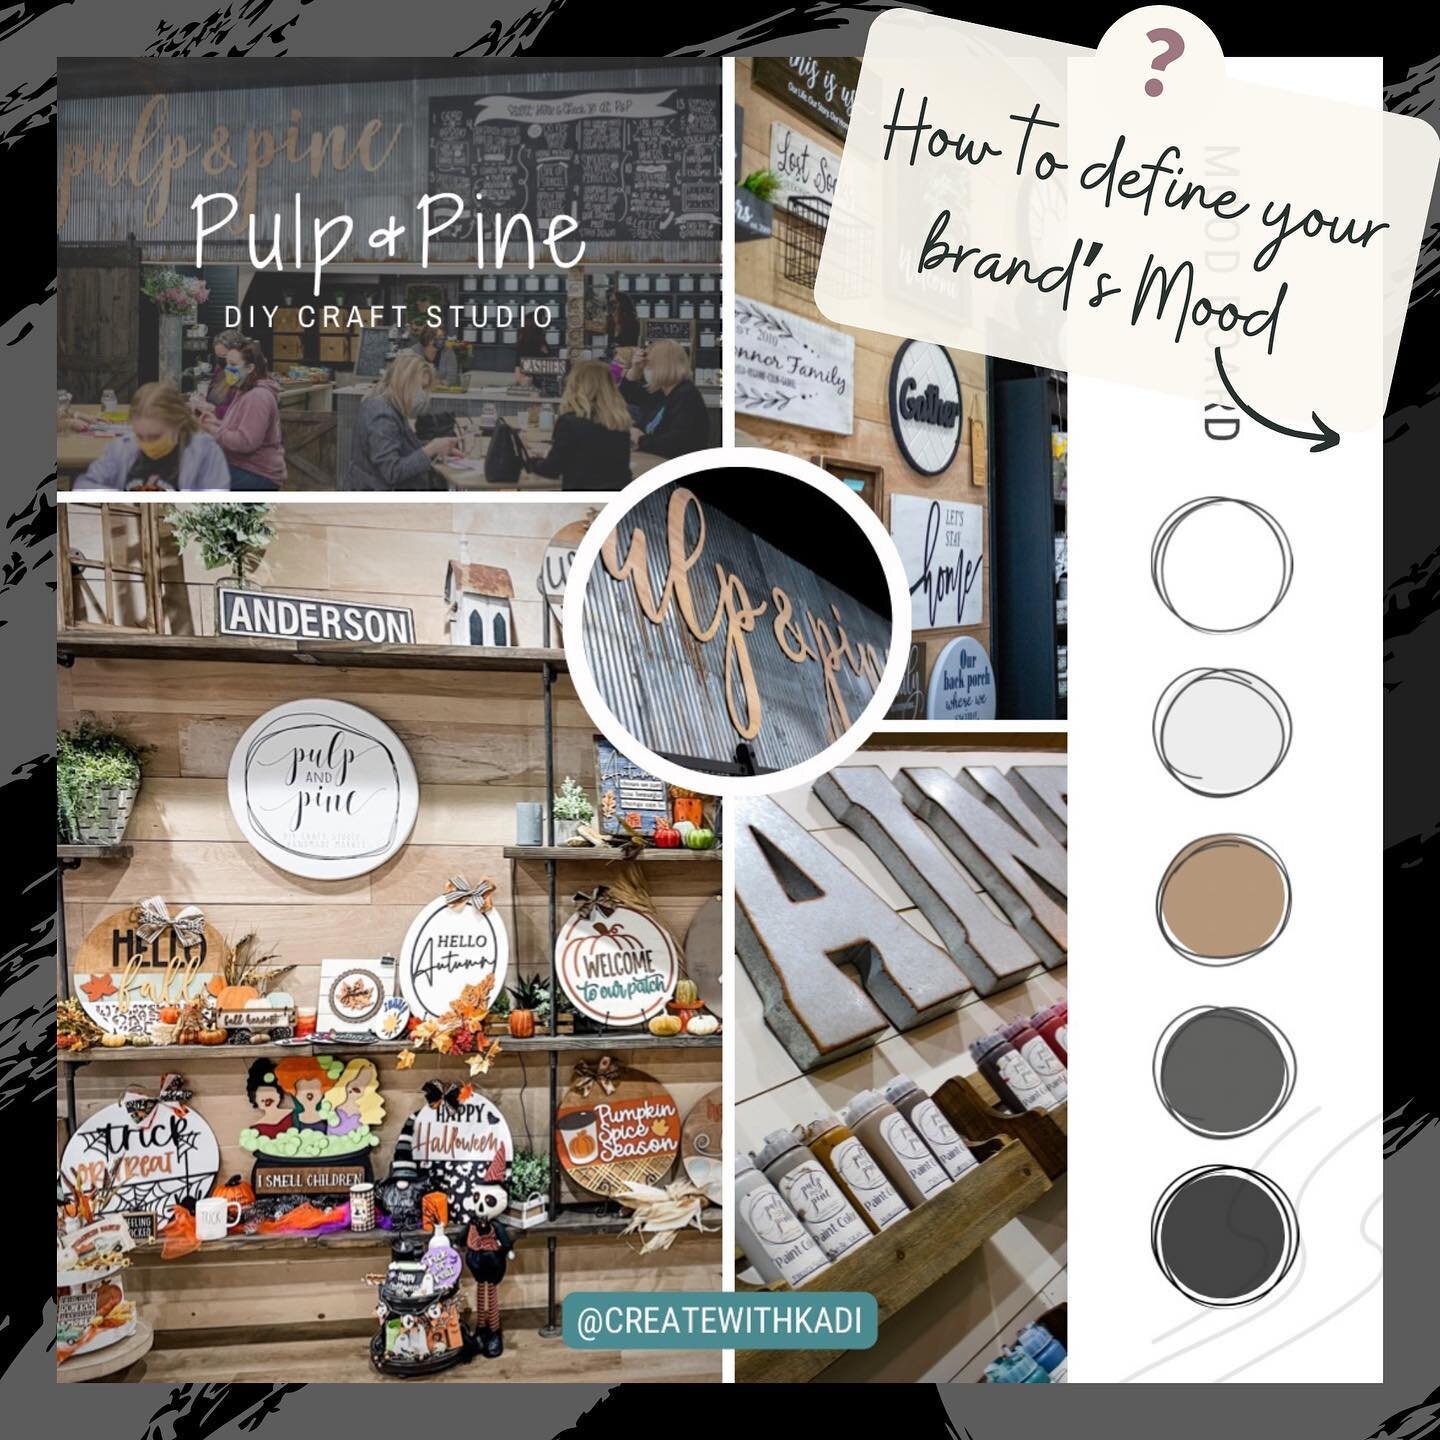 👀 Sneak Peek at my client&rsquo;s #moodboard for their new website!

🤷&zwj;♀️ What&rsquo;s a &ldquo;mood board&rdquo;, anyway? 

Basically it&rsquo;s a visual collage to use as the inspiration for your website and/or branding design. It conveys the